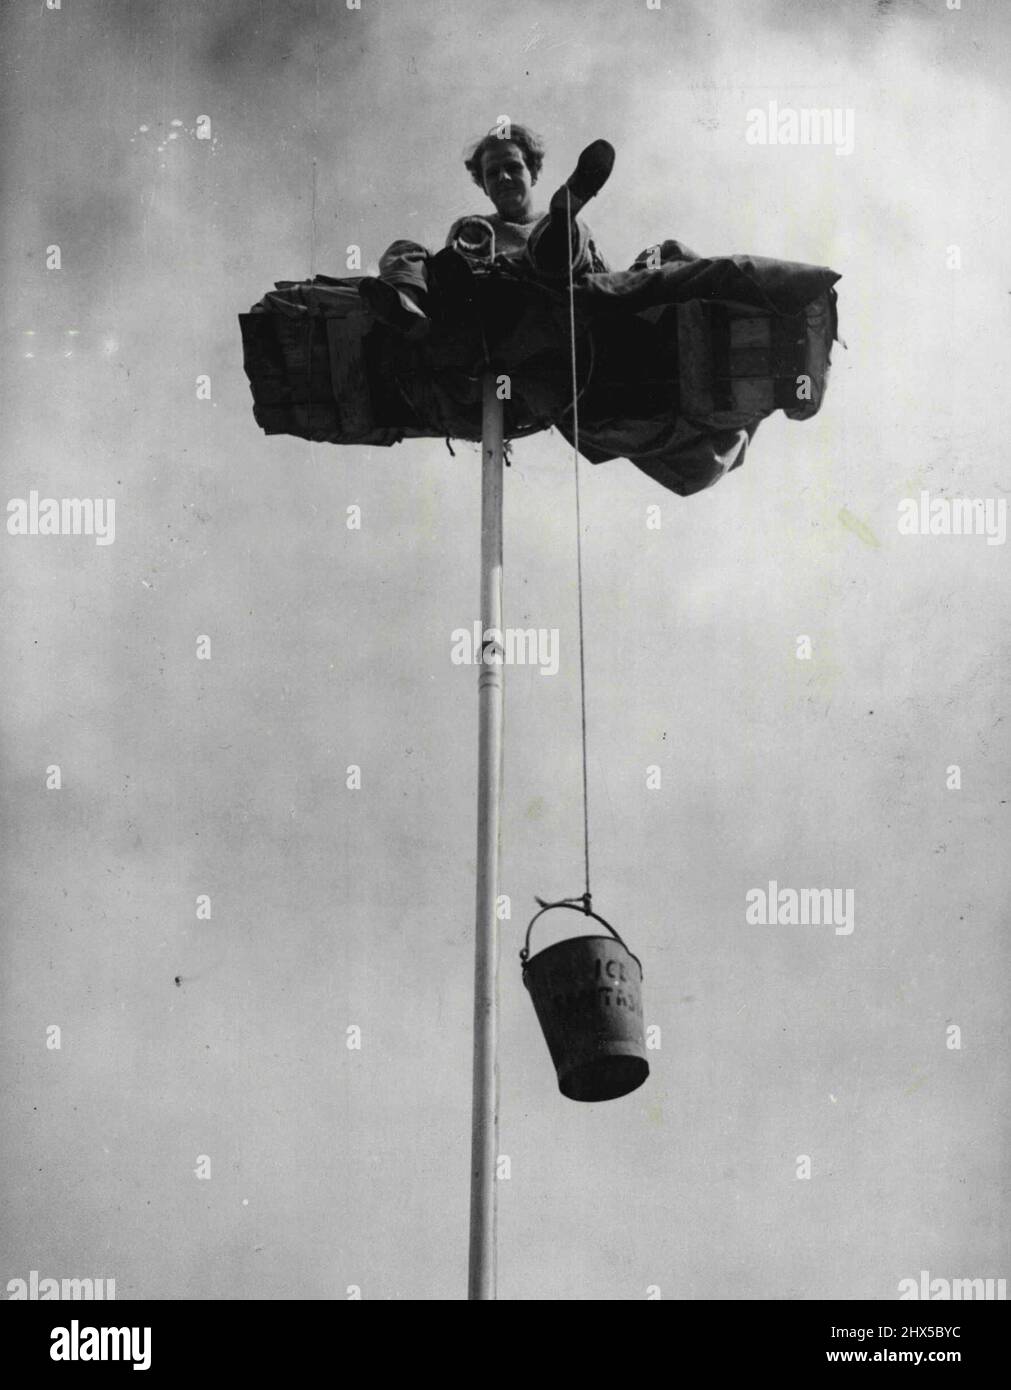 Reno Wons Be Parted from His Pole -- Because Reno (in private life 26- - year-old acrobat John Fossett) refuses to come dawn from his perch atop a 40-feet-high flag-poles his food has to be sent up by rope and bucket, as this picture taken of Britain's high-est striker at Brighton (Sussex) Zoo - today (Friday) shows. Reno shinned up the pole yesterday morning, after Mr. Vic Templer producer of the Zoo's summer ice revue refused to release him from his contract. Normally, Reno does aerial acrobatics on the pole. Now, he just sits-despite appeals, despite the weather. He says he won't come down Stock Photo